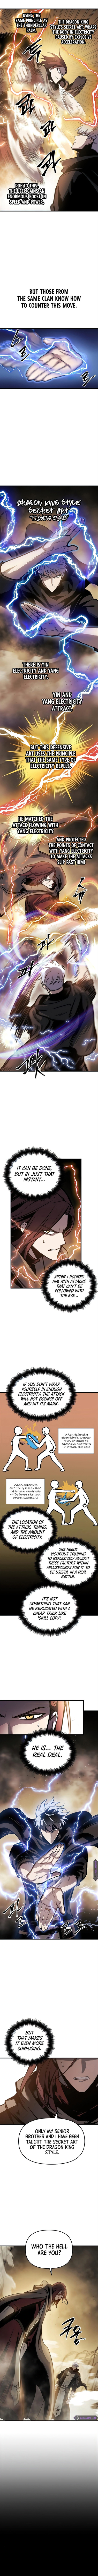 Reincarnation of the Suicidal Battle God - Chapter 17 Page 5